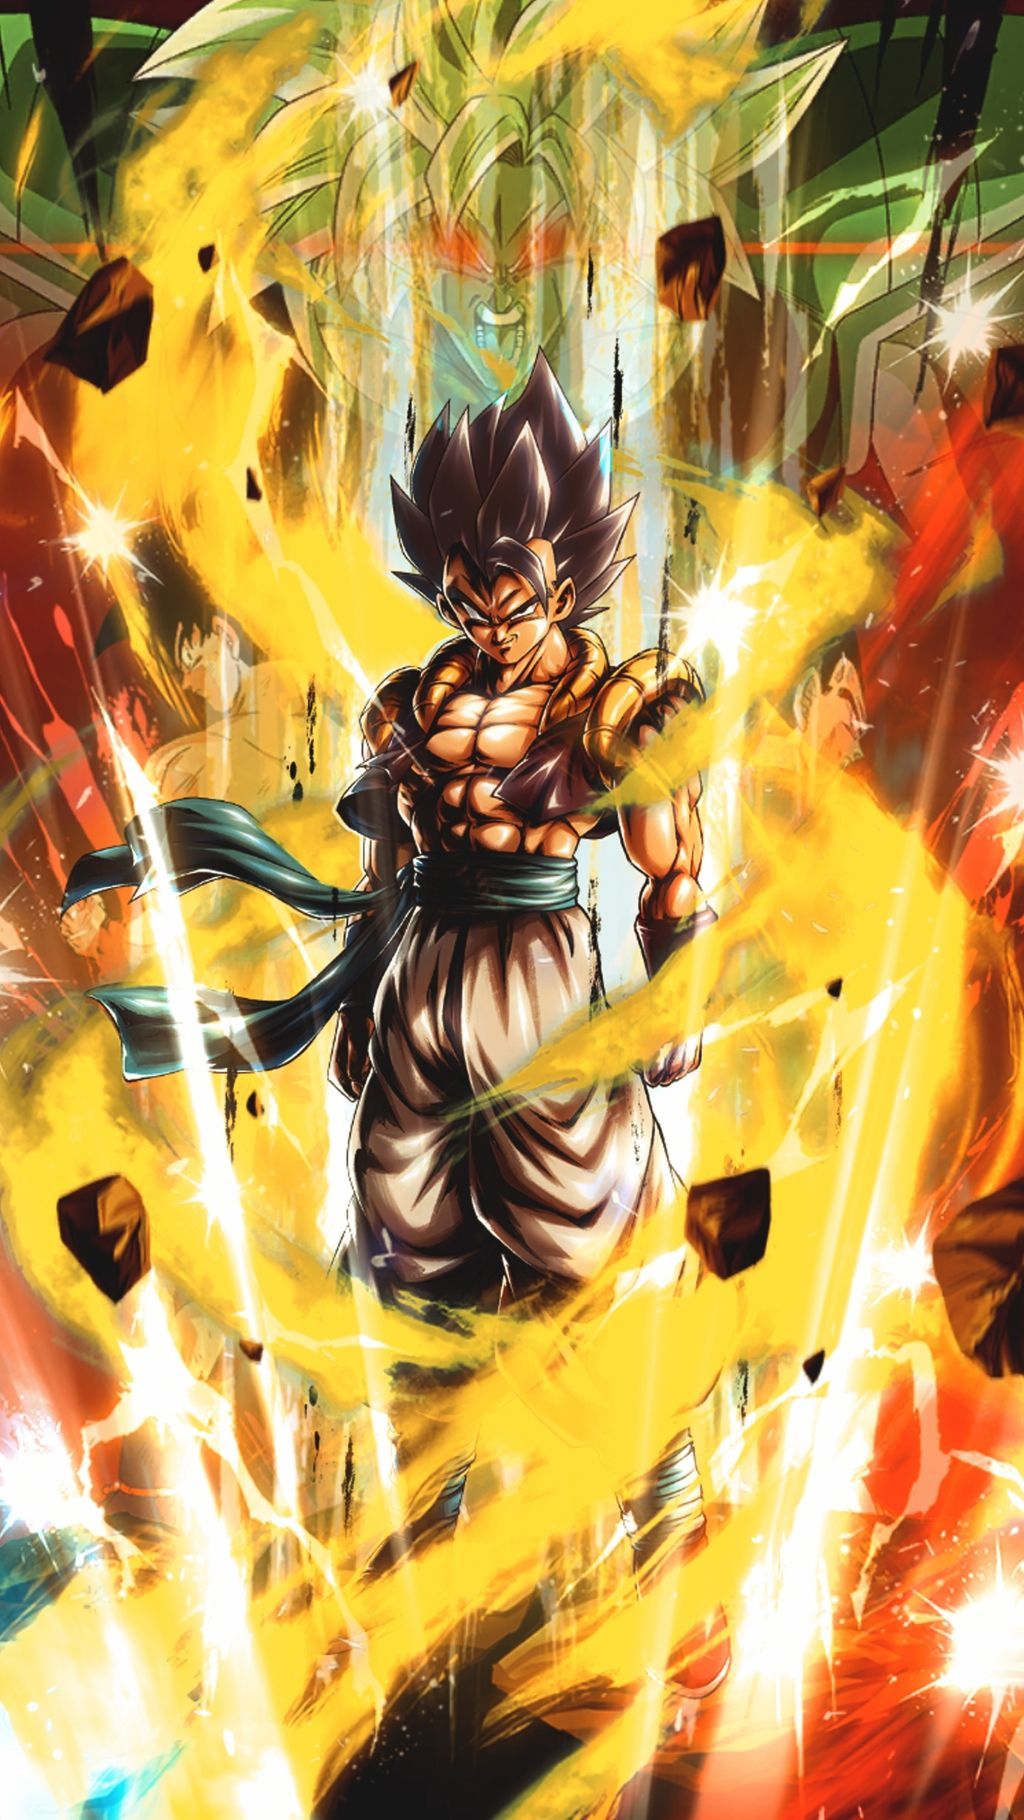 4K Wallpaper of DBZ and Super for Phones. Dragon ball wallpaper, Dragon ball super artwork, Anime dragon ball